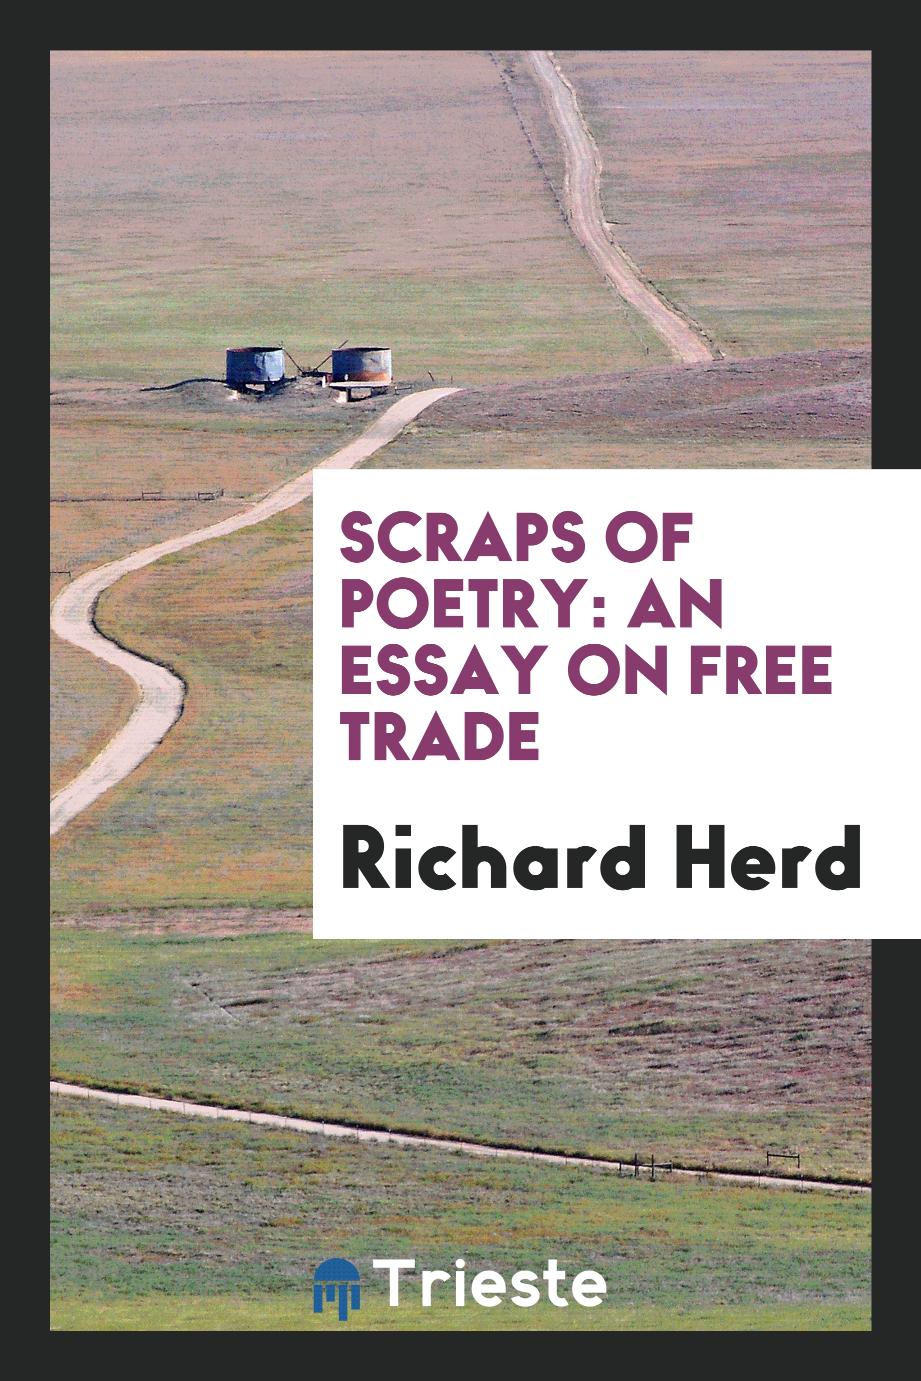 Scraps of poetry: An essay on free trade